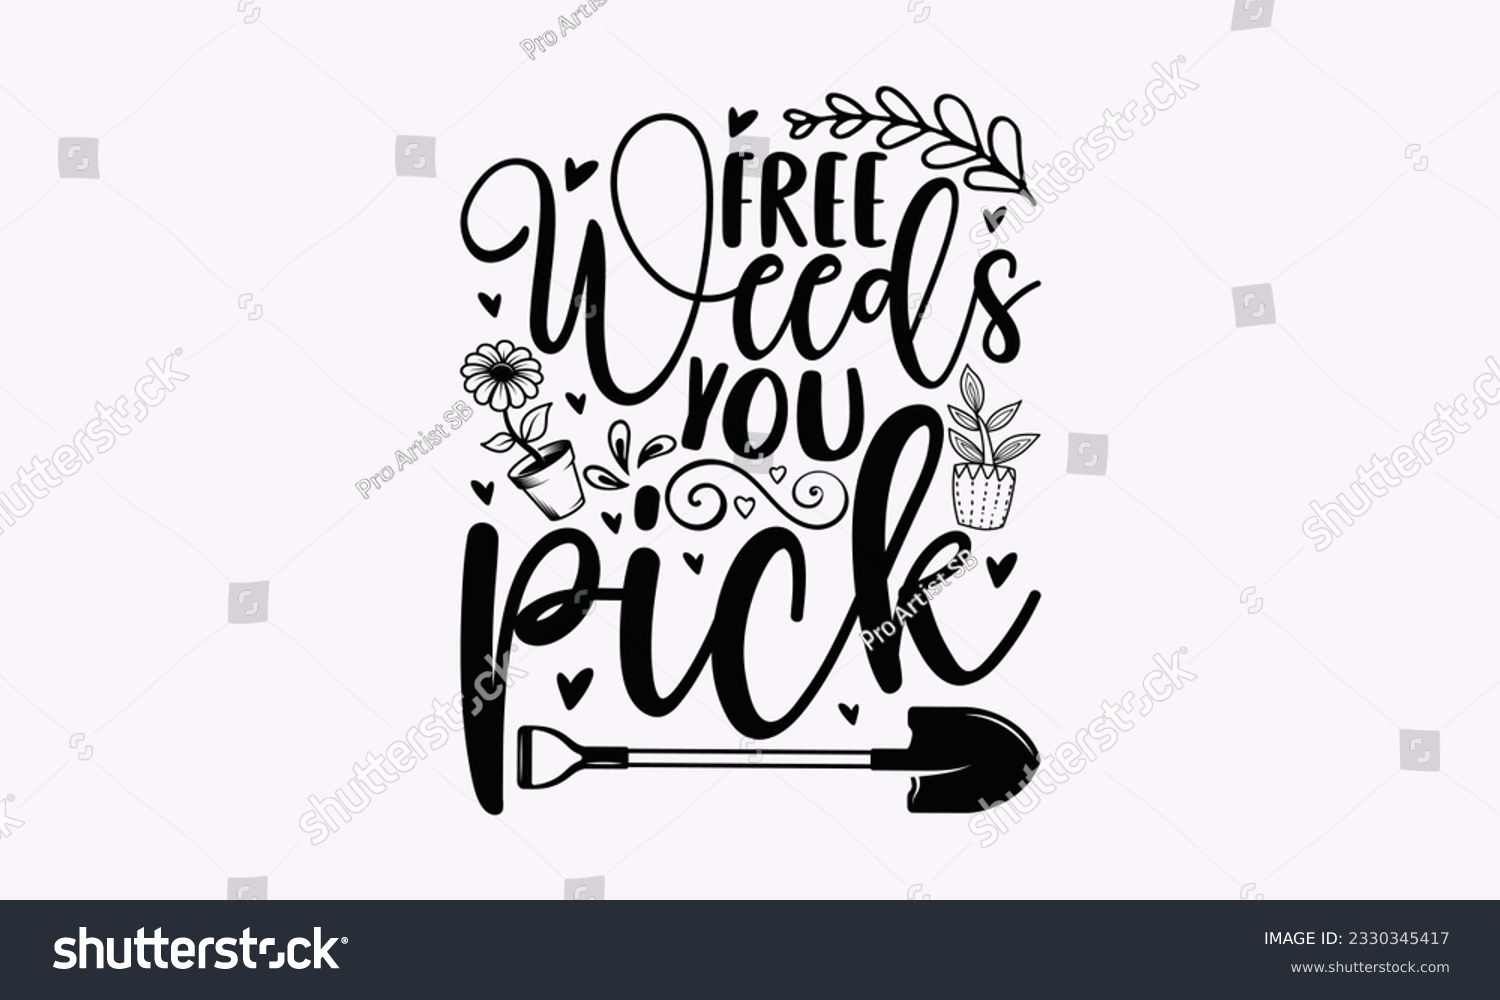 SVG of Free weeds you pick - Gardening SVG Design, Flower Quotes, Calligraphy graphic design, Typography poster with old style camera and quote. svg